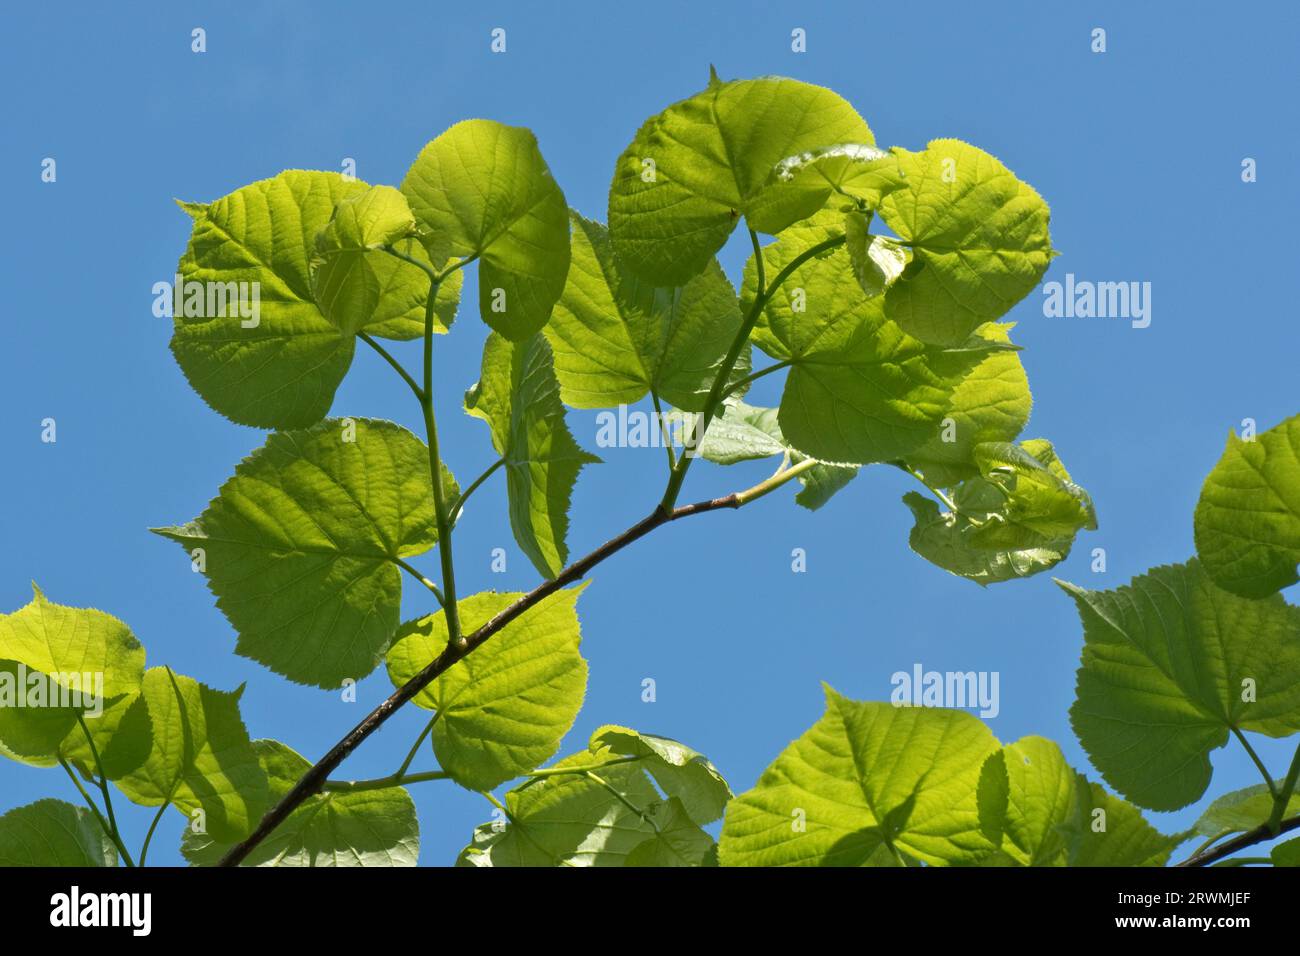 Small-leaved lime or linden (Tilia cordata) fresh green tree leaves against a blue sky and backlit by sunlight on a fine spring day, Berkshire, May Stock Photo